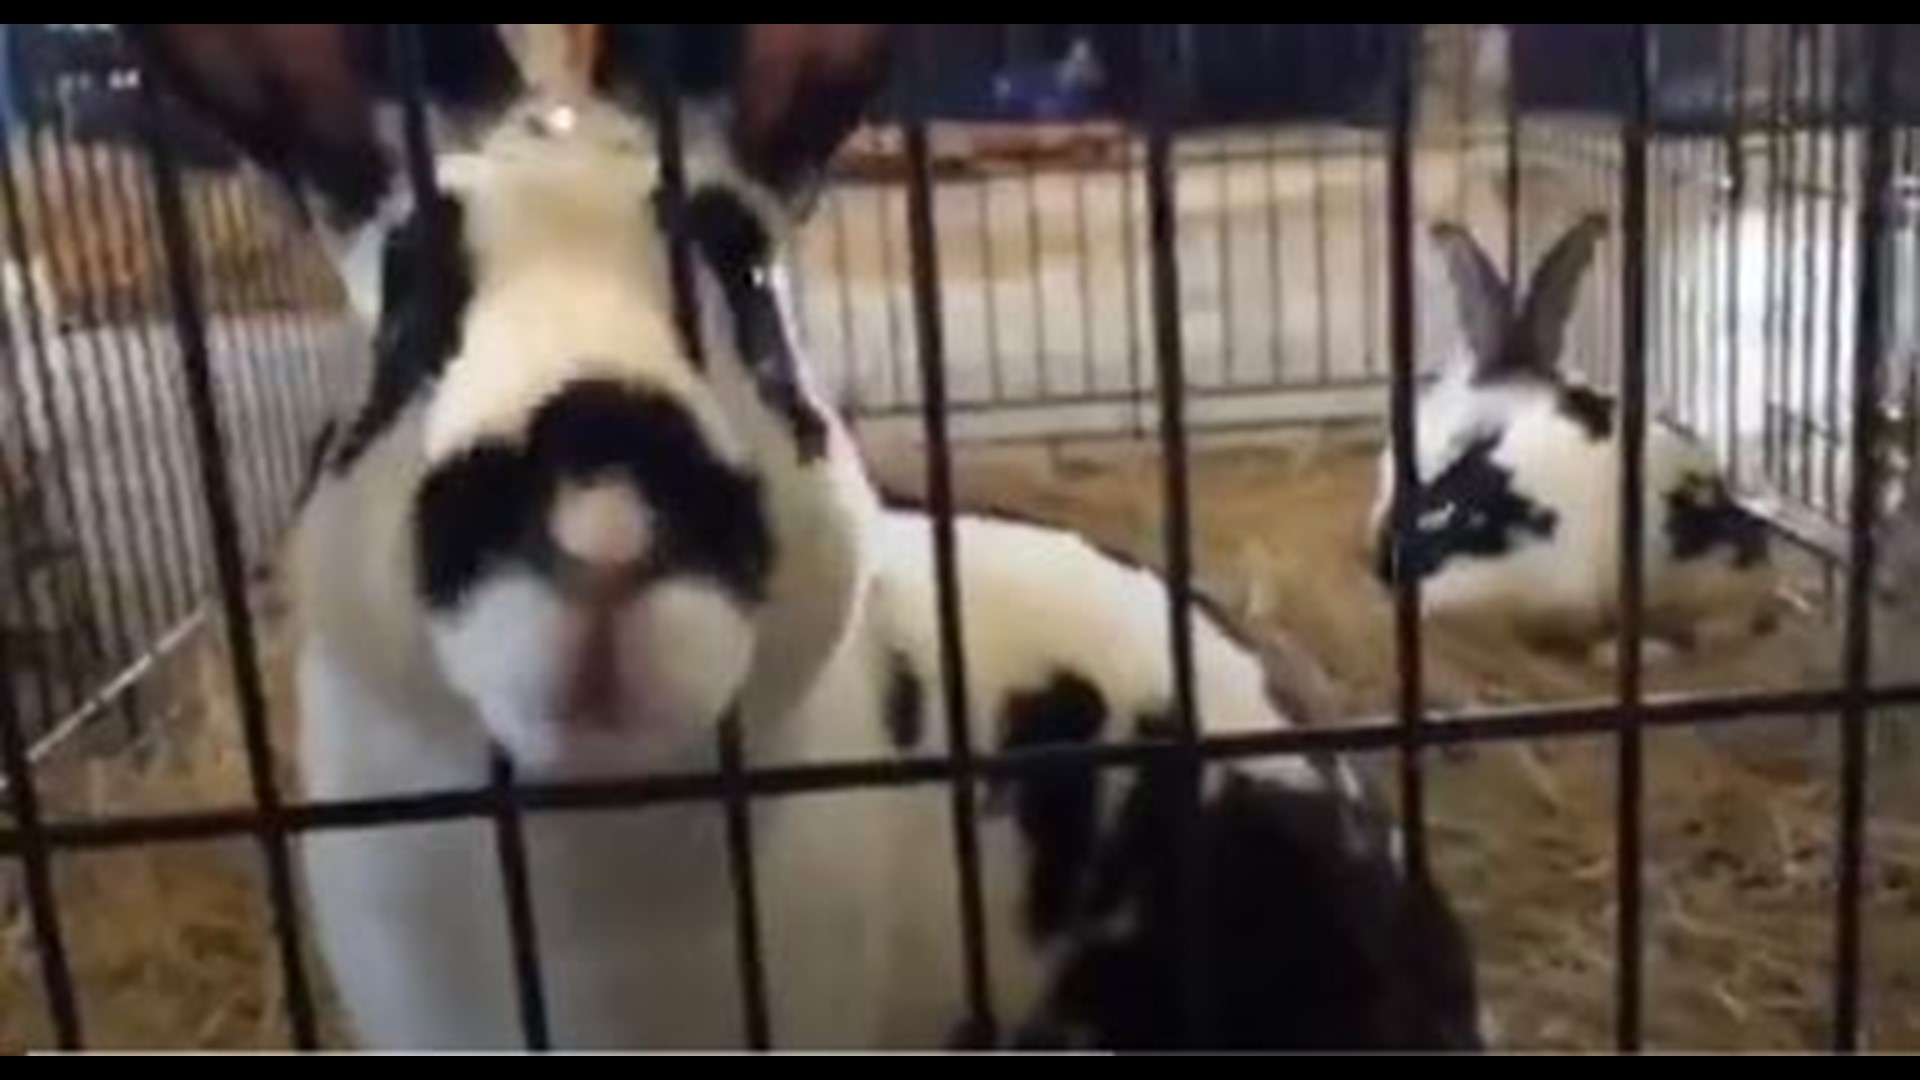 Dozens of rabbits are getting some tender loving care after being rescued by the Houston Humane Society late Monday. They also rescued three dogs from the home in Ka